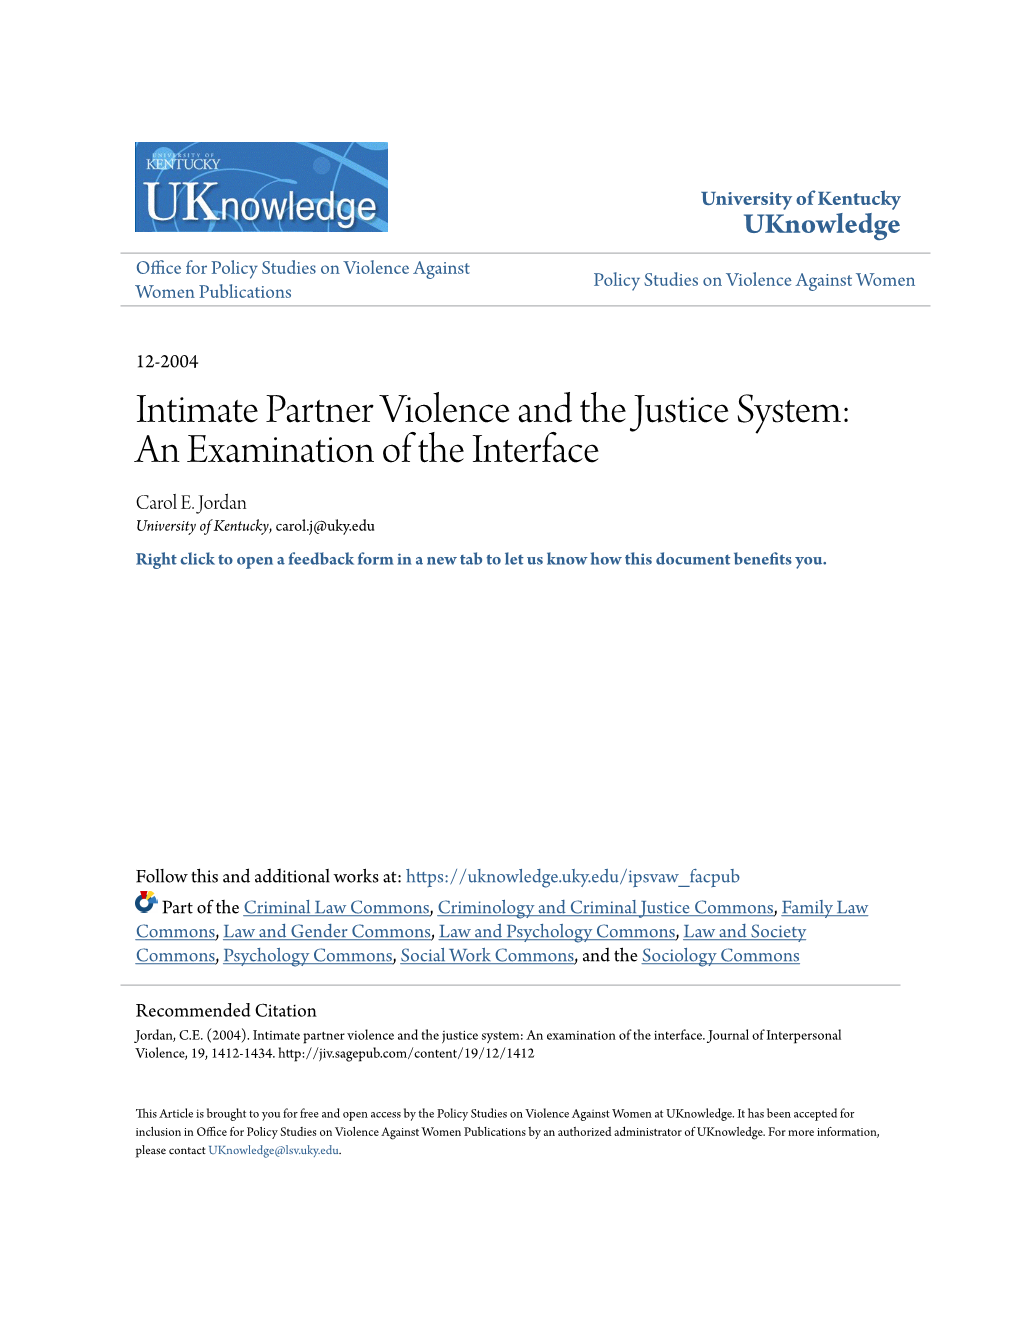 Intimate Partner Violence and the Justice System: an Examination of the Interface Carol E